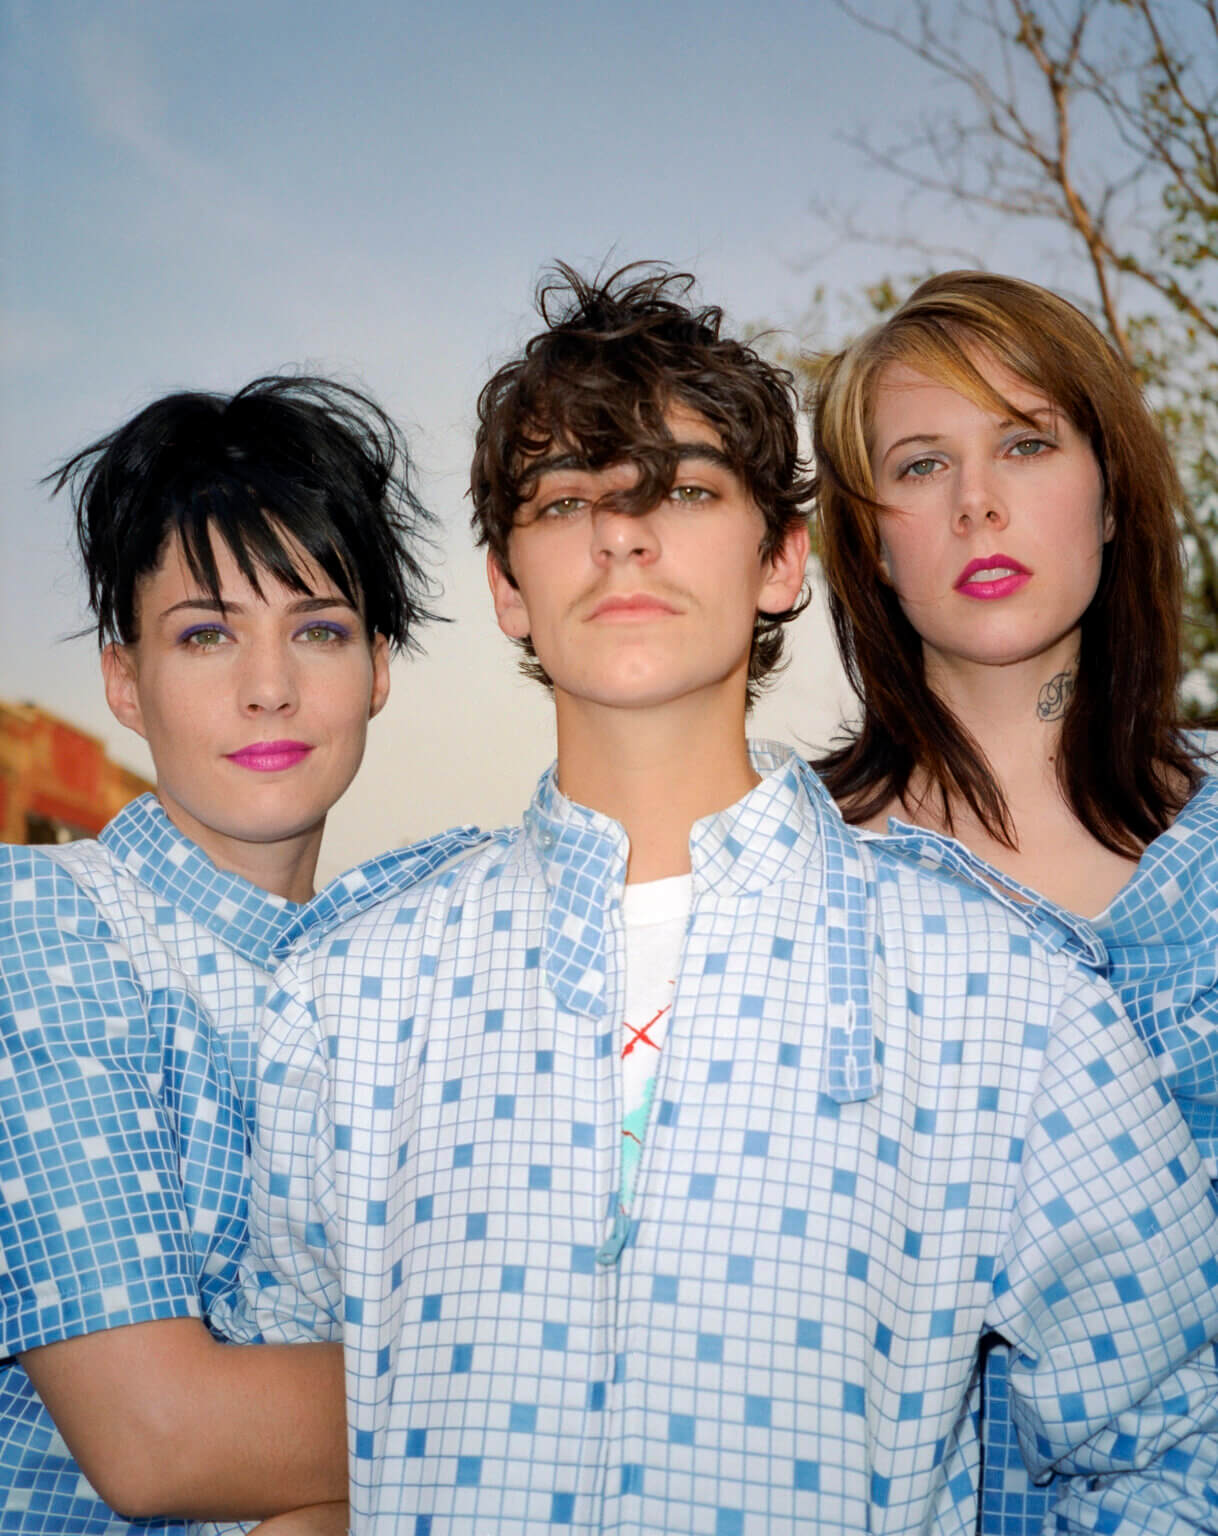 Le Tigre have Announce 2023 Tour Dates. The legendary NYC riot-girl band, will play shows in London, New York, Chicago, and many more